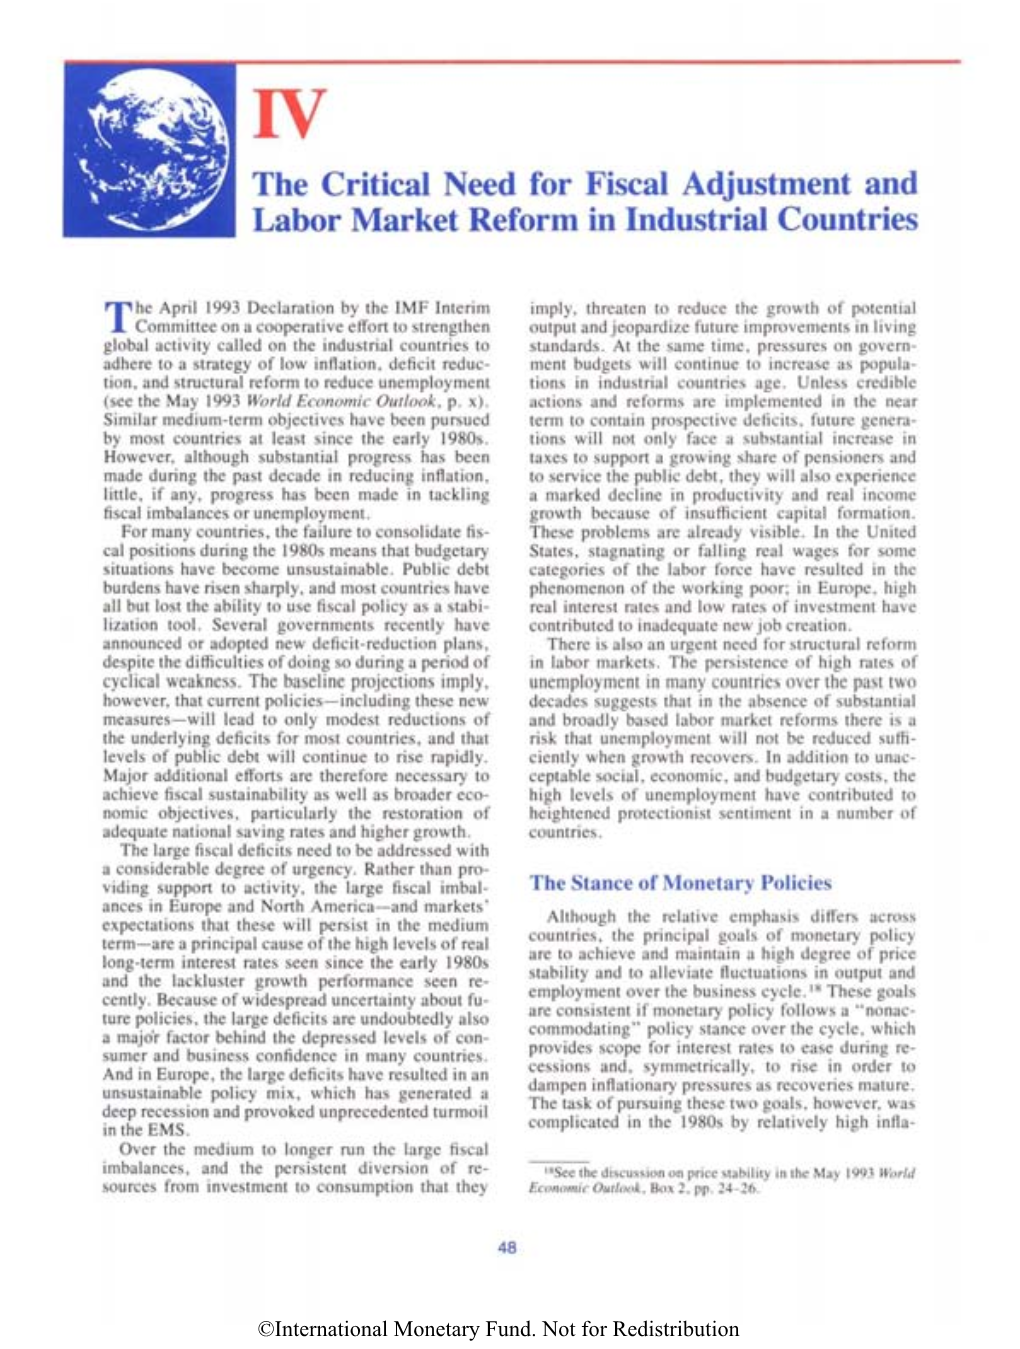 The Critical Need for Fiscal Adjustment and Labor Market Reform in Industrial Countries